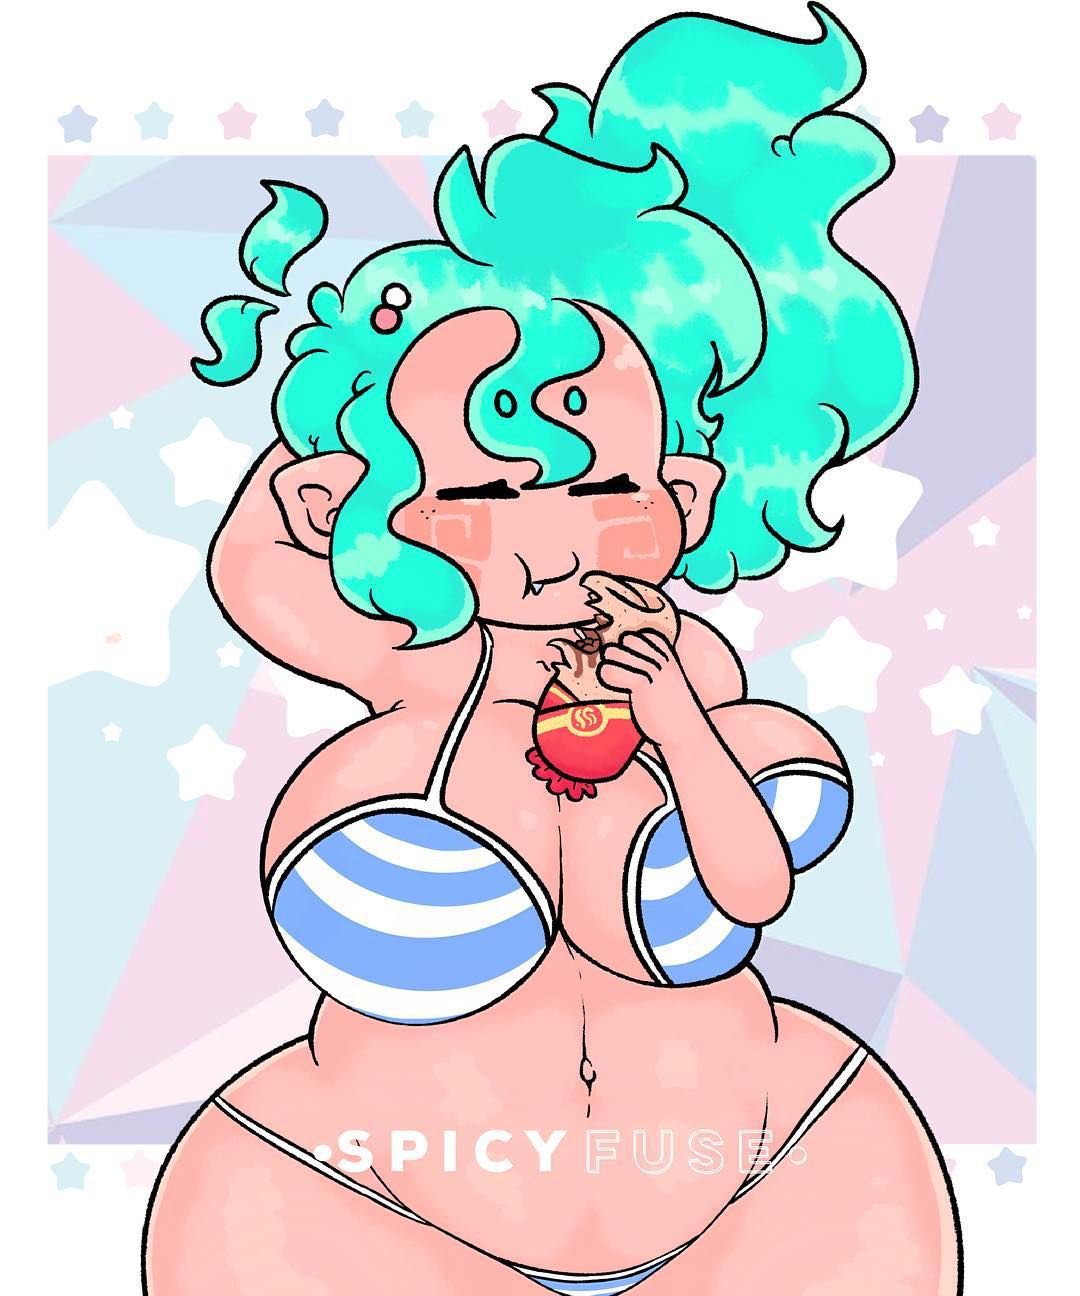 SpicyFuse 88